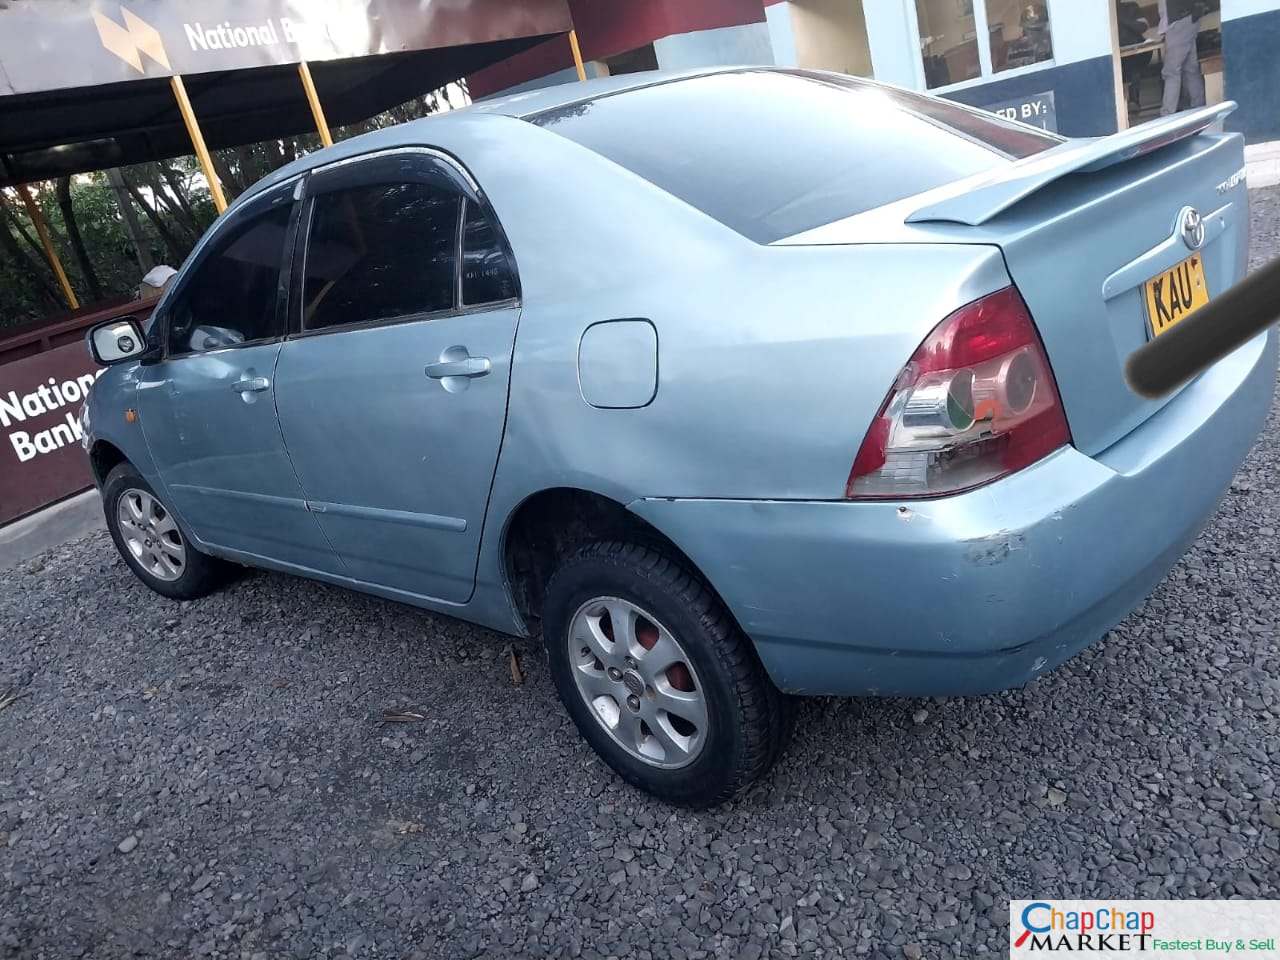 Toyota Corolla NZE local QUICK SALE You Pay 30% Deposit Trade in OK EXCLUSIVE